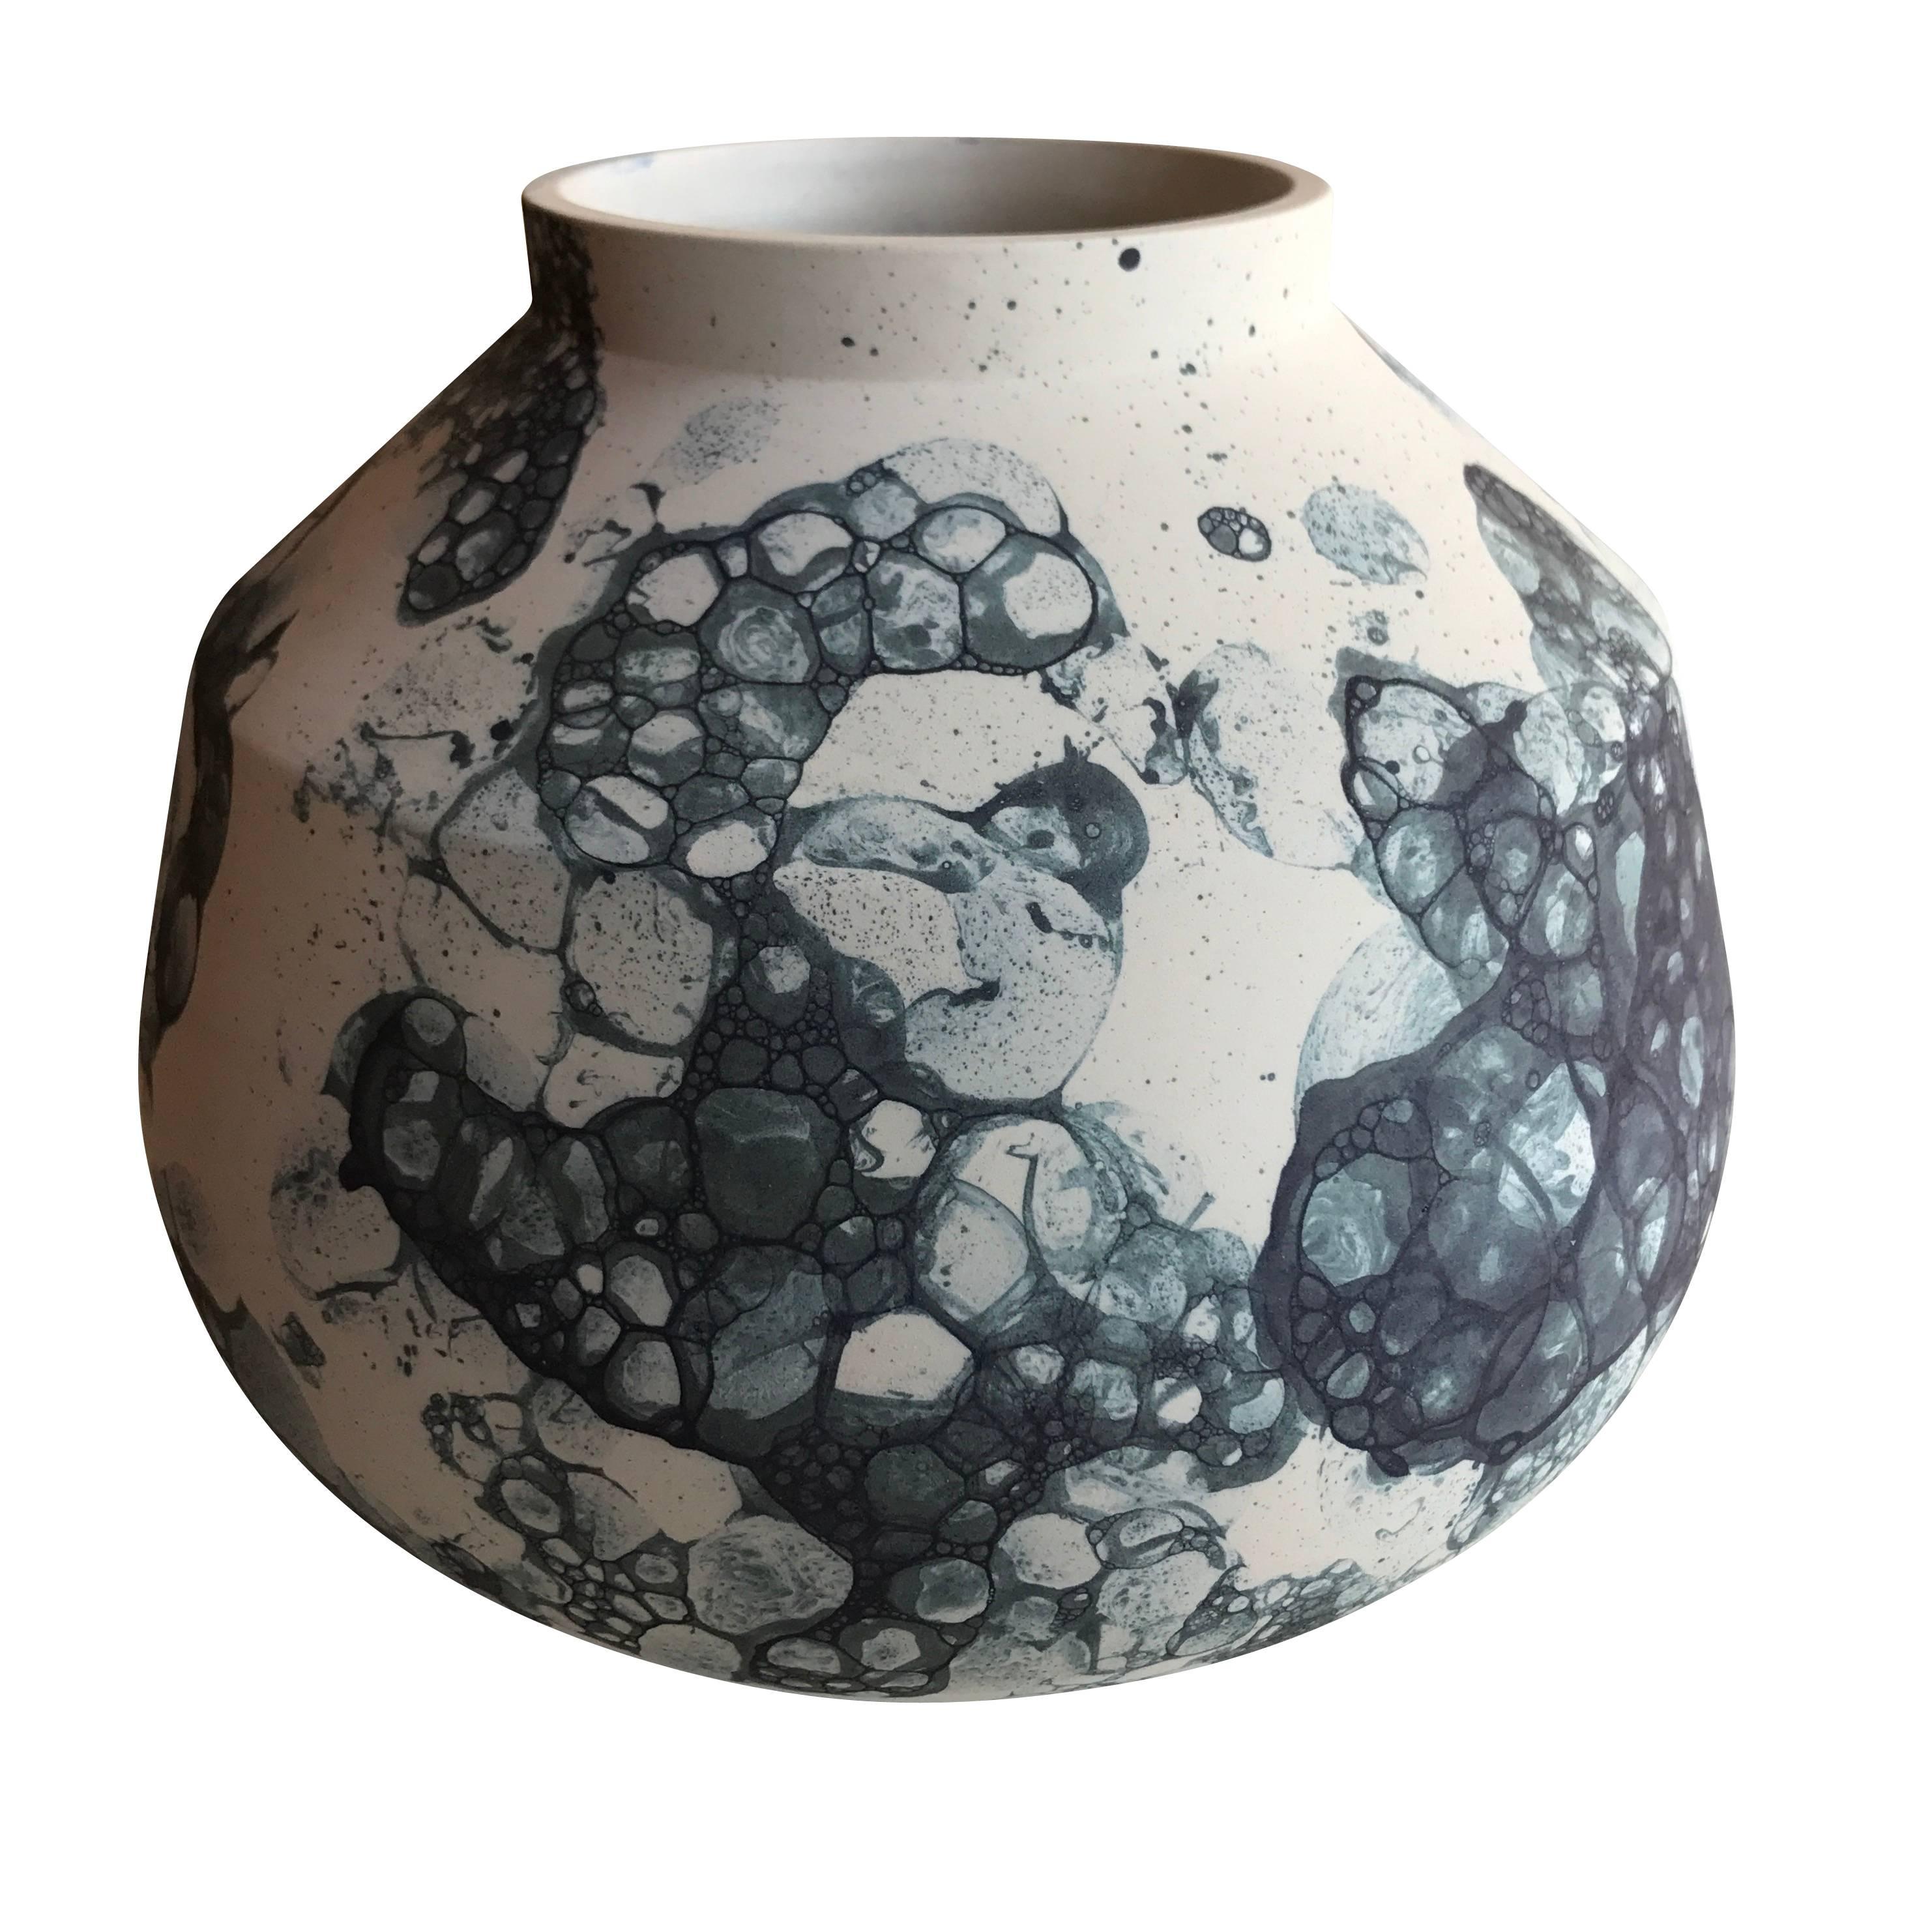 Contemporary Dutch Bubble design made from actual shades of blue bubbles adhered to ceramic vase.
 